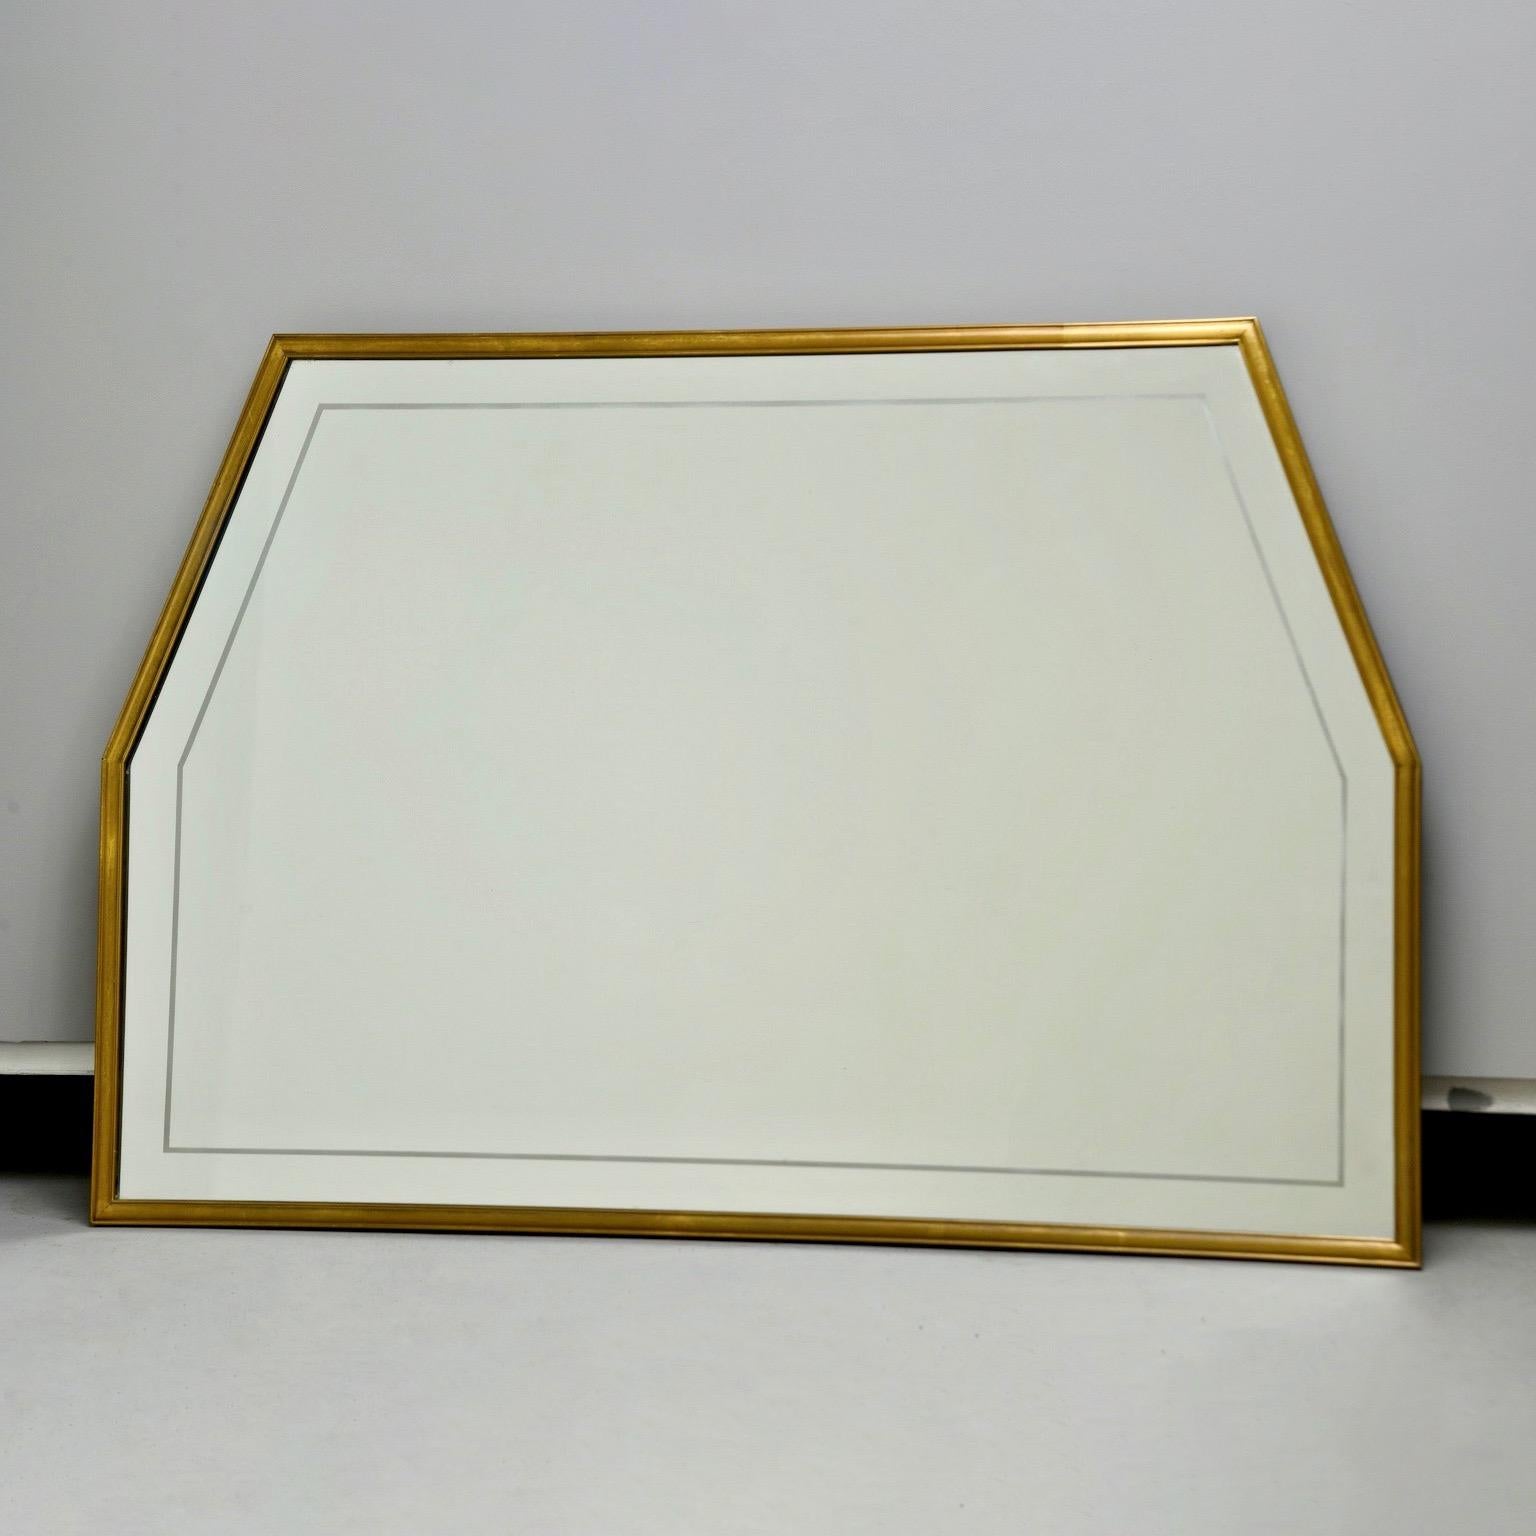 Circa 1960s Italian mirror has a narrow brass frame and six sided trapezoidal shape. Mirror itself has an etched border. Unknown maker.


Actual Mirror Size:  33.5” h x 50” w